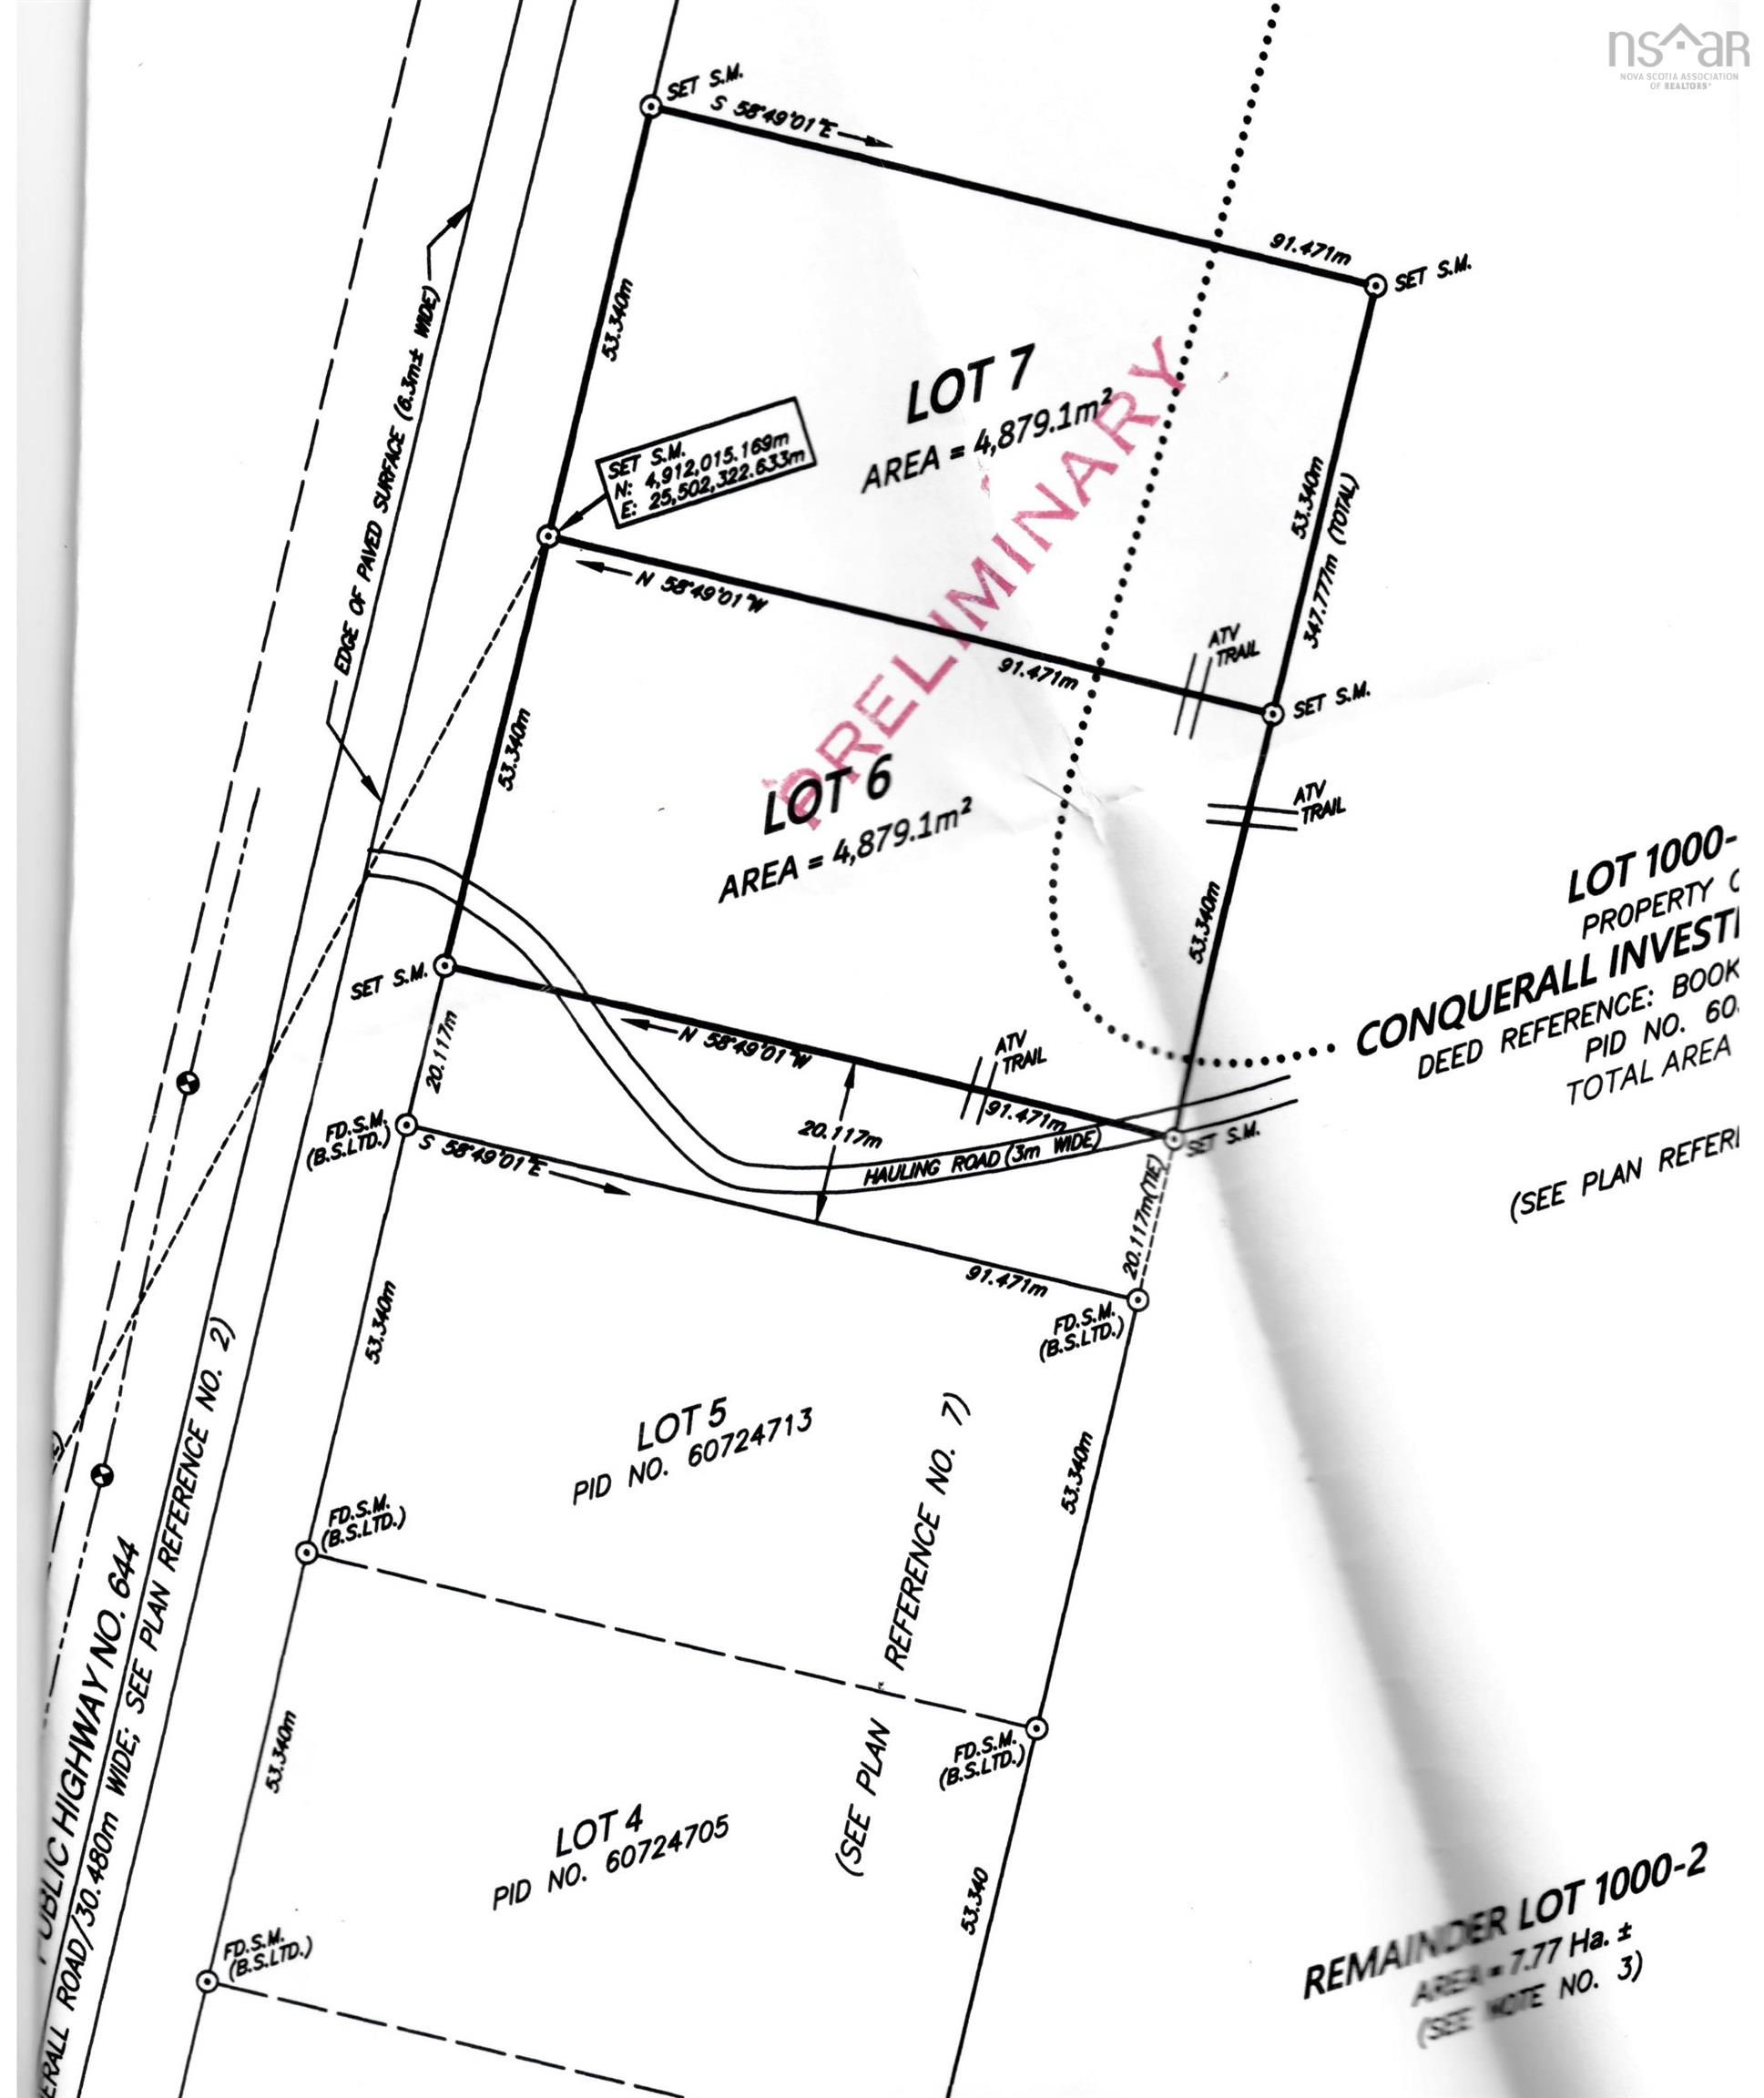 Main Photo: Lot 6 Conquerall Road in Conquerall Bank: 405-Lunenburg County Vacant Land for sale (South Shore)  : MLS®# 202325594